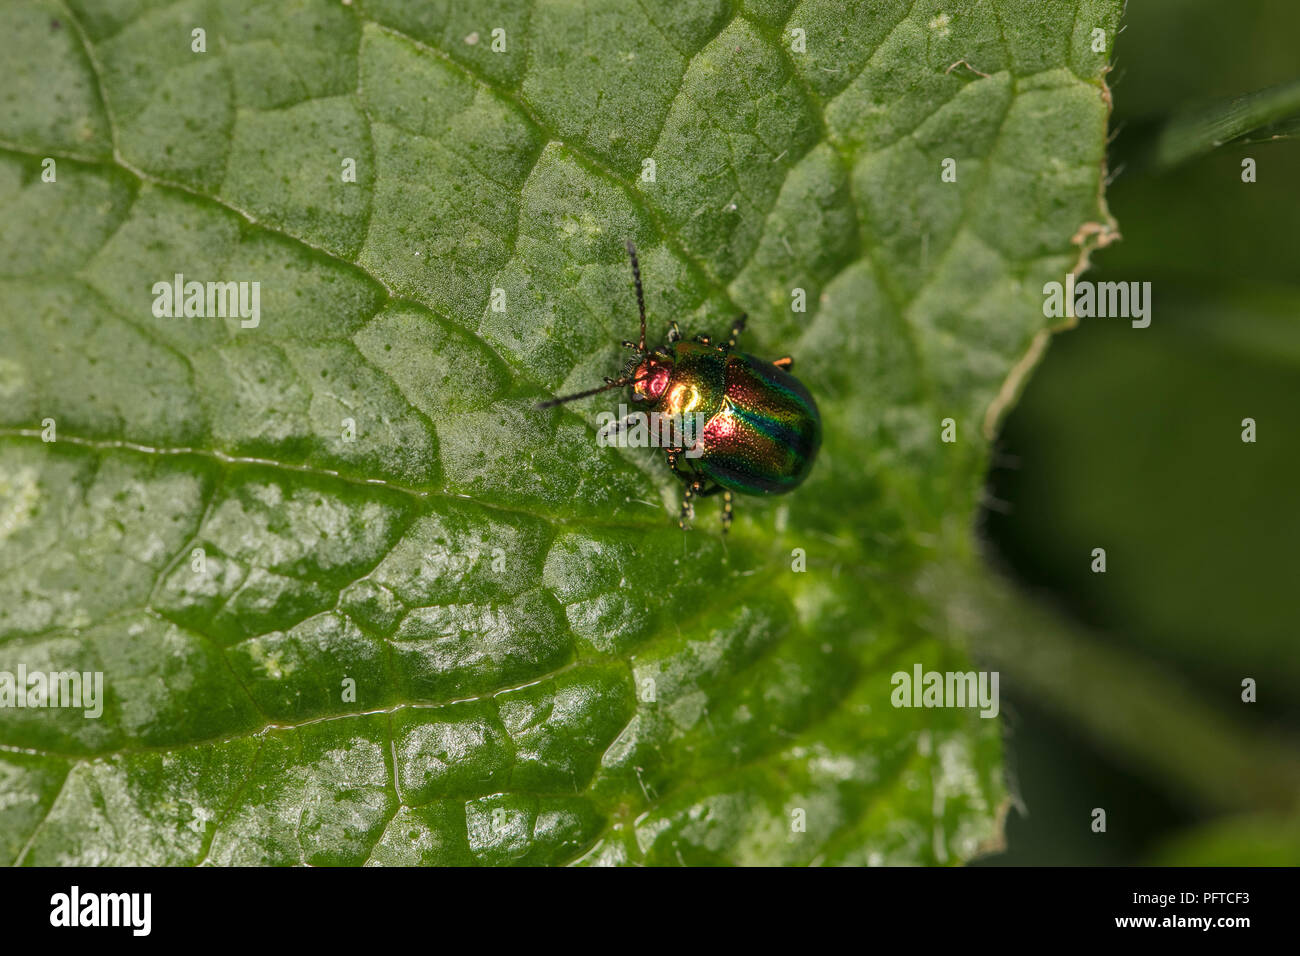 Chrysolina fastuosa, colorful beetle, amazing colors, goes through the leaf, top view Stock Photo